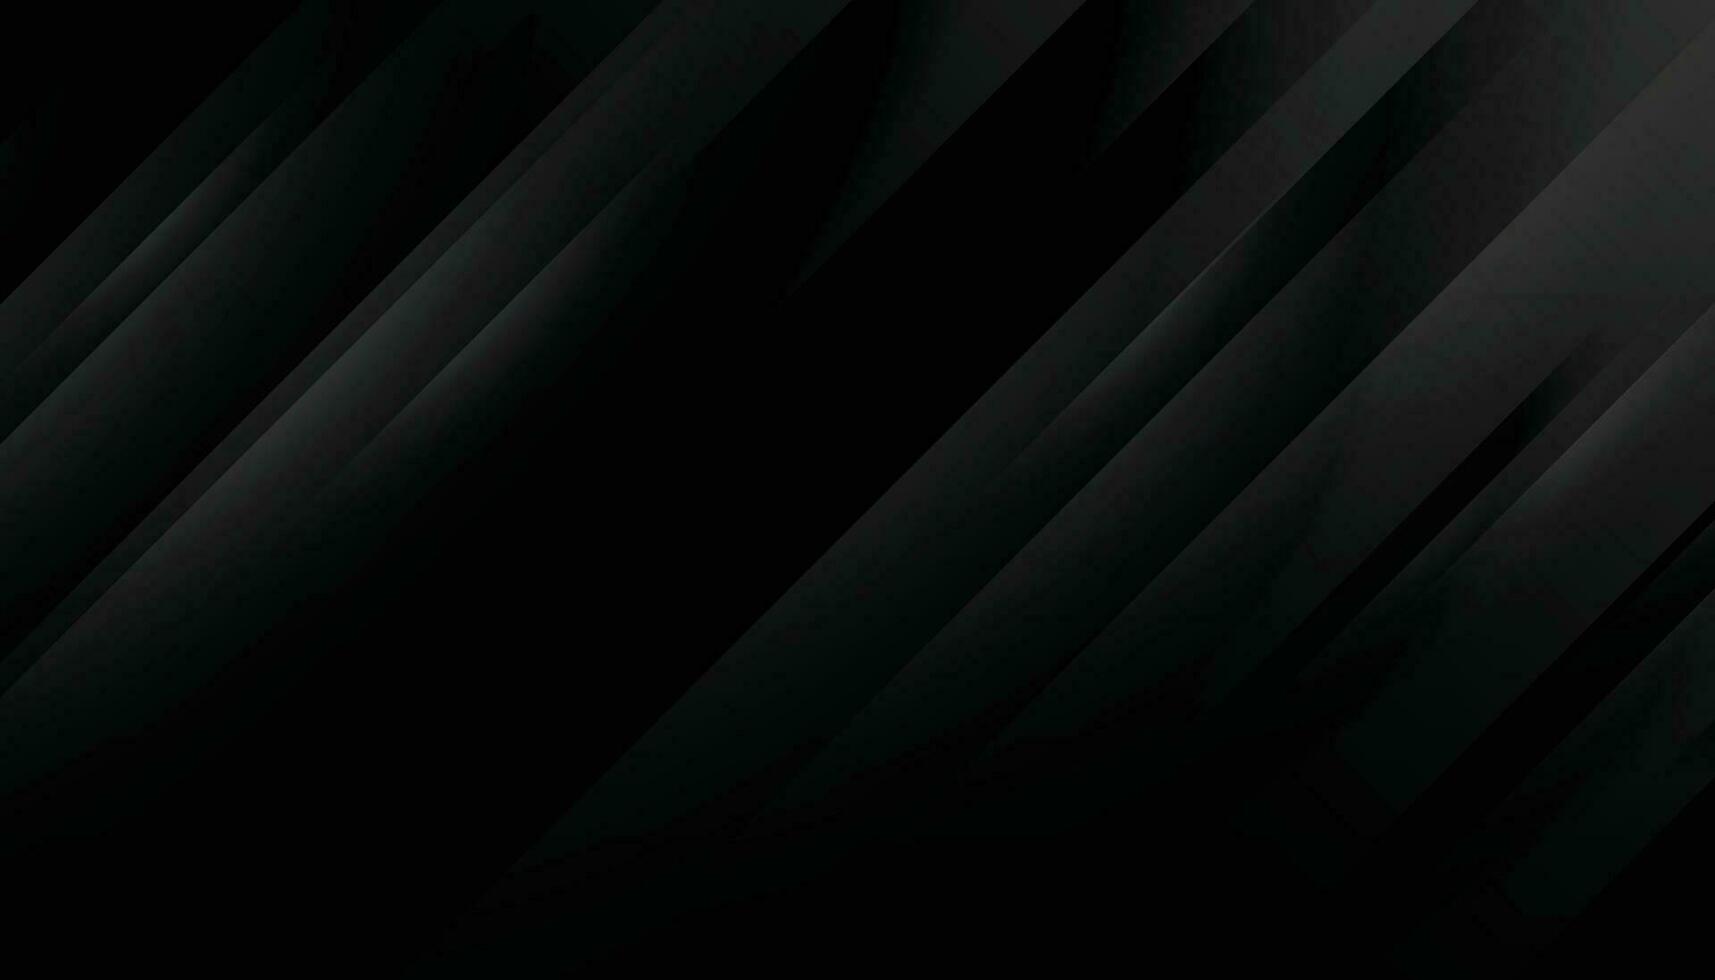 Black abstract background with diagonal lines vector